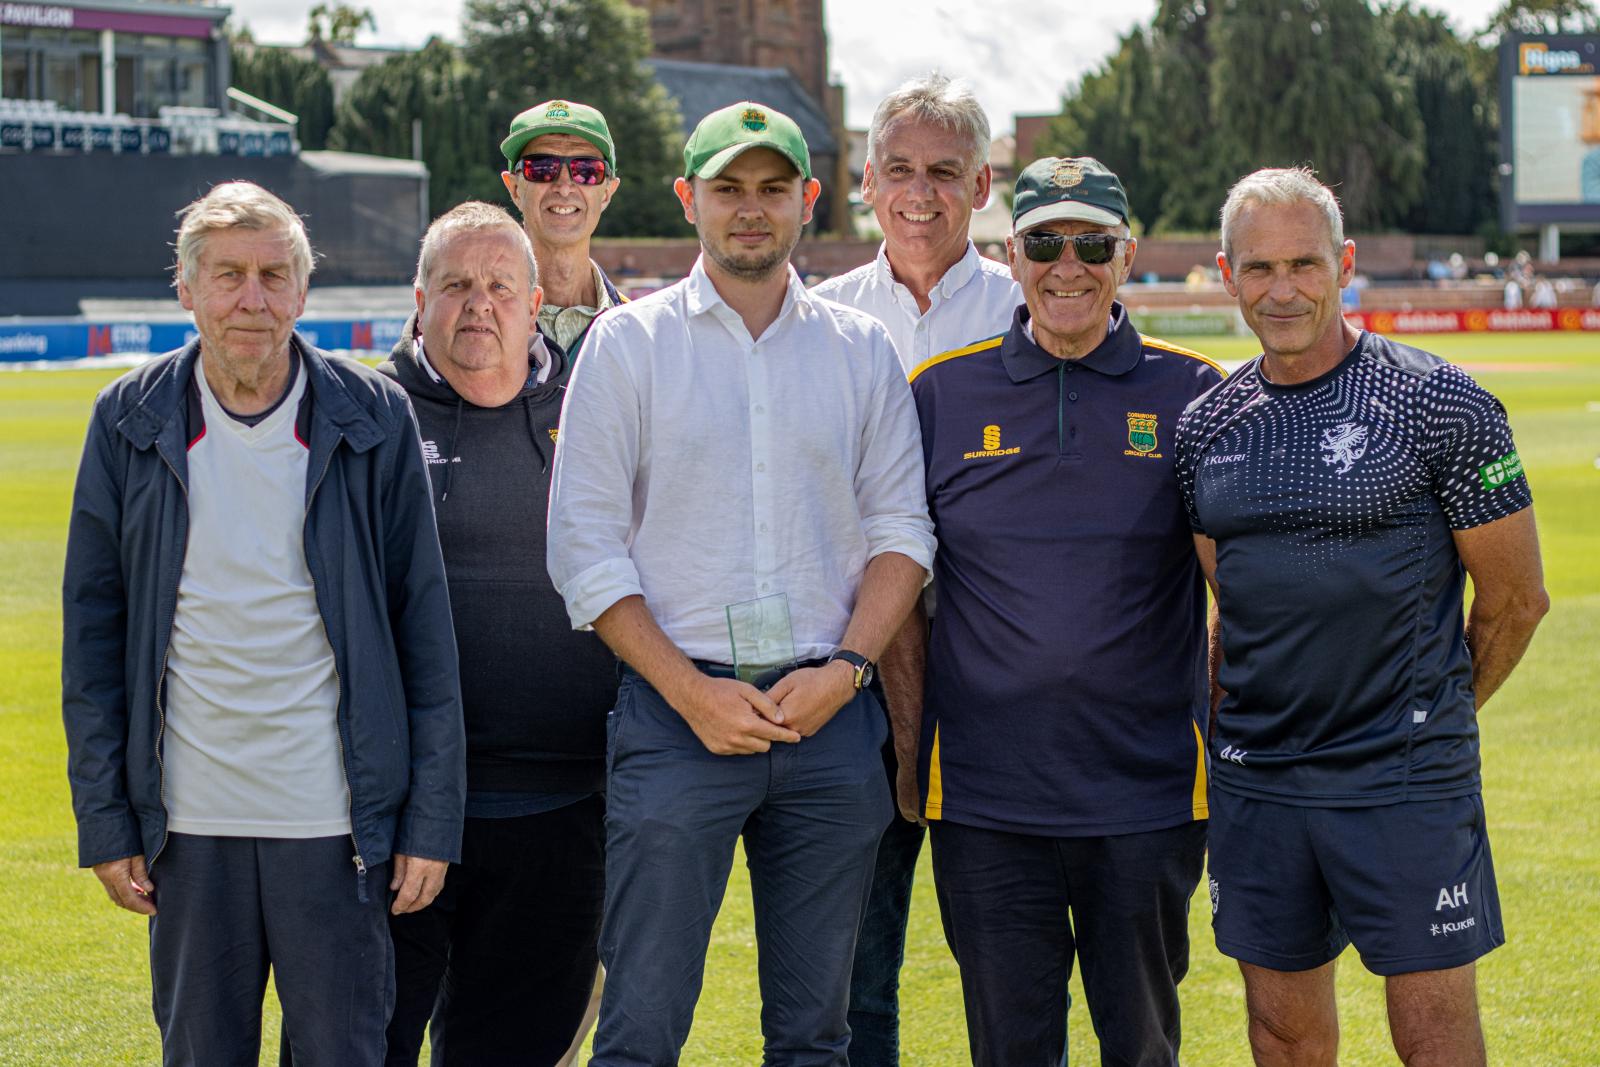 The Cornwood CC Grounds Team receive their award at the Cooper Associates County Ground.